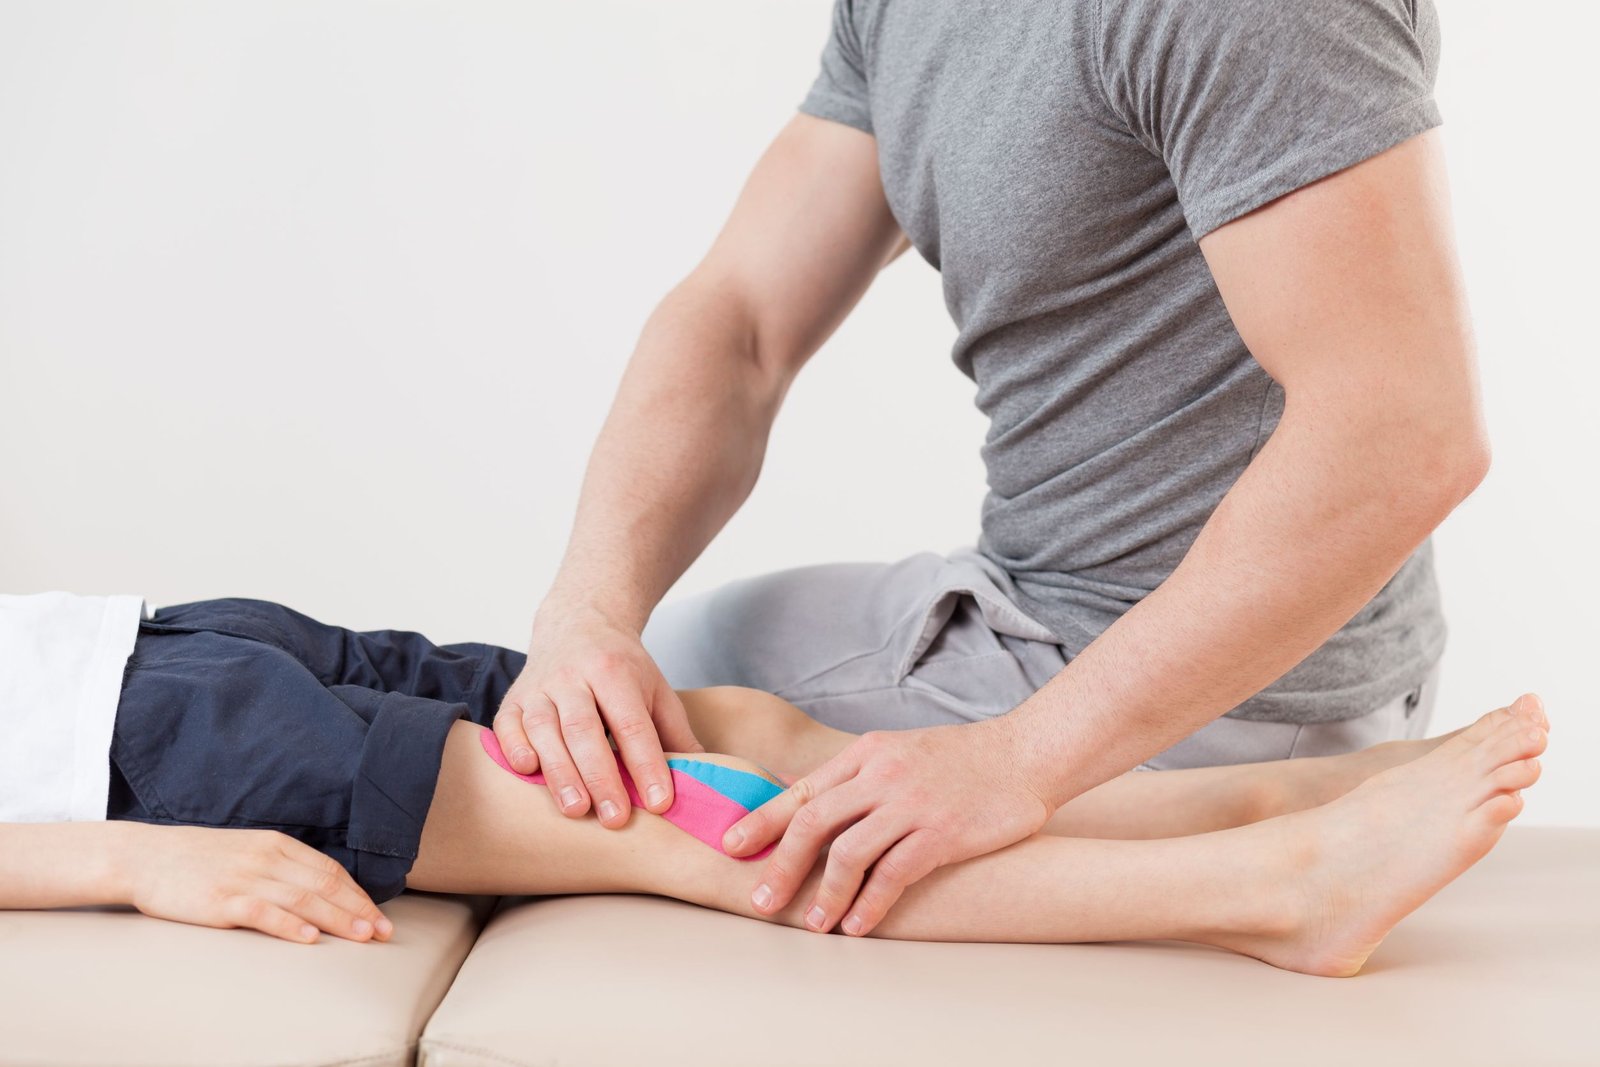 An Ultimate Guide You Need To Check On About Physiotherapist